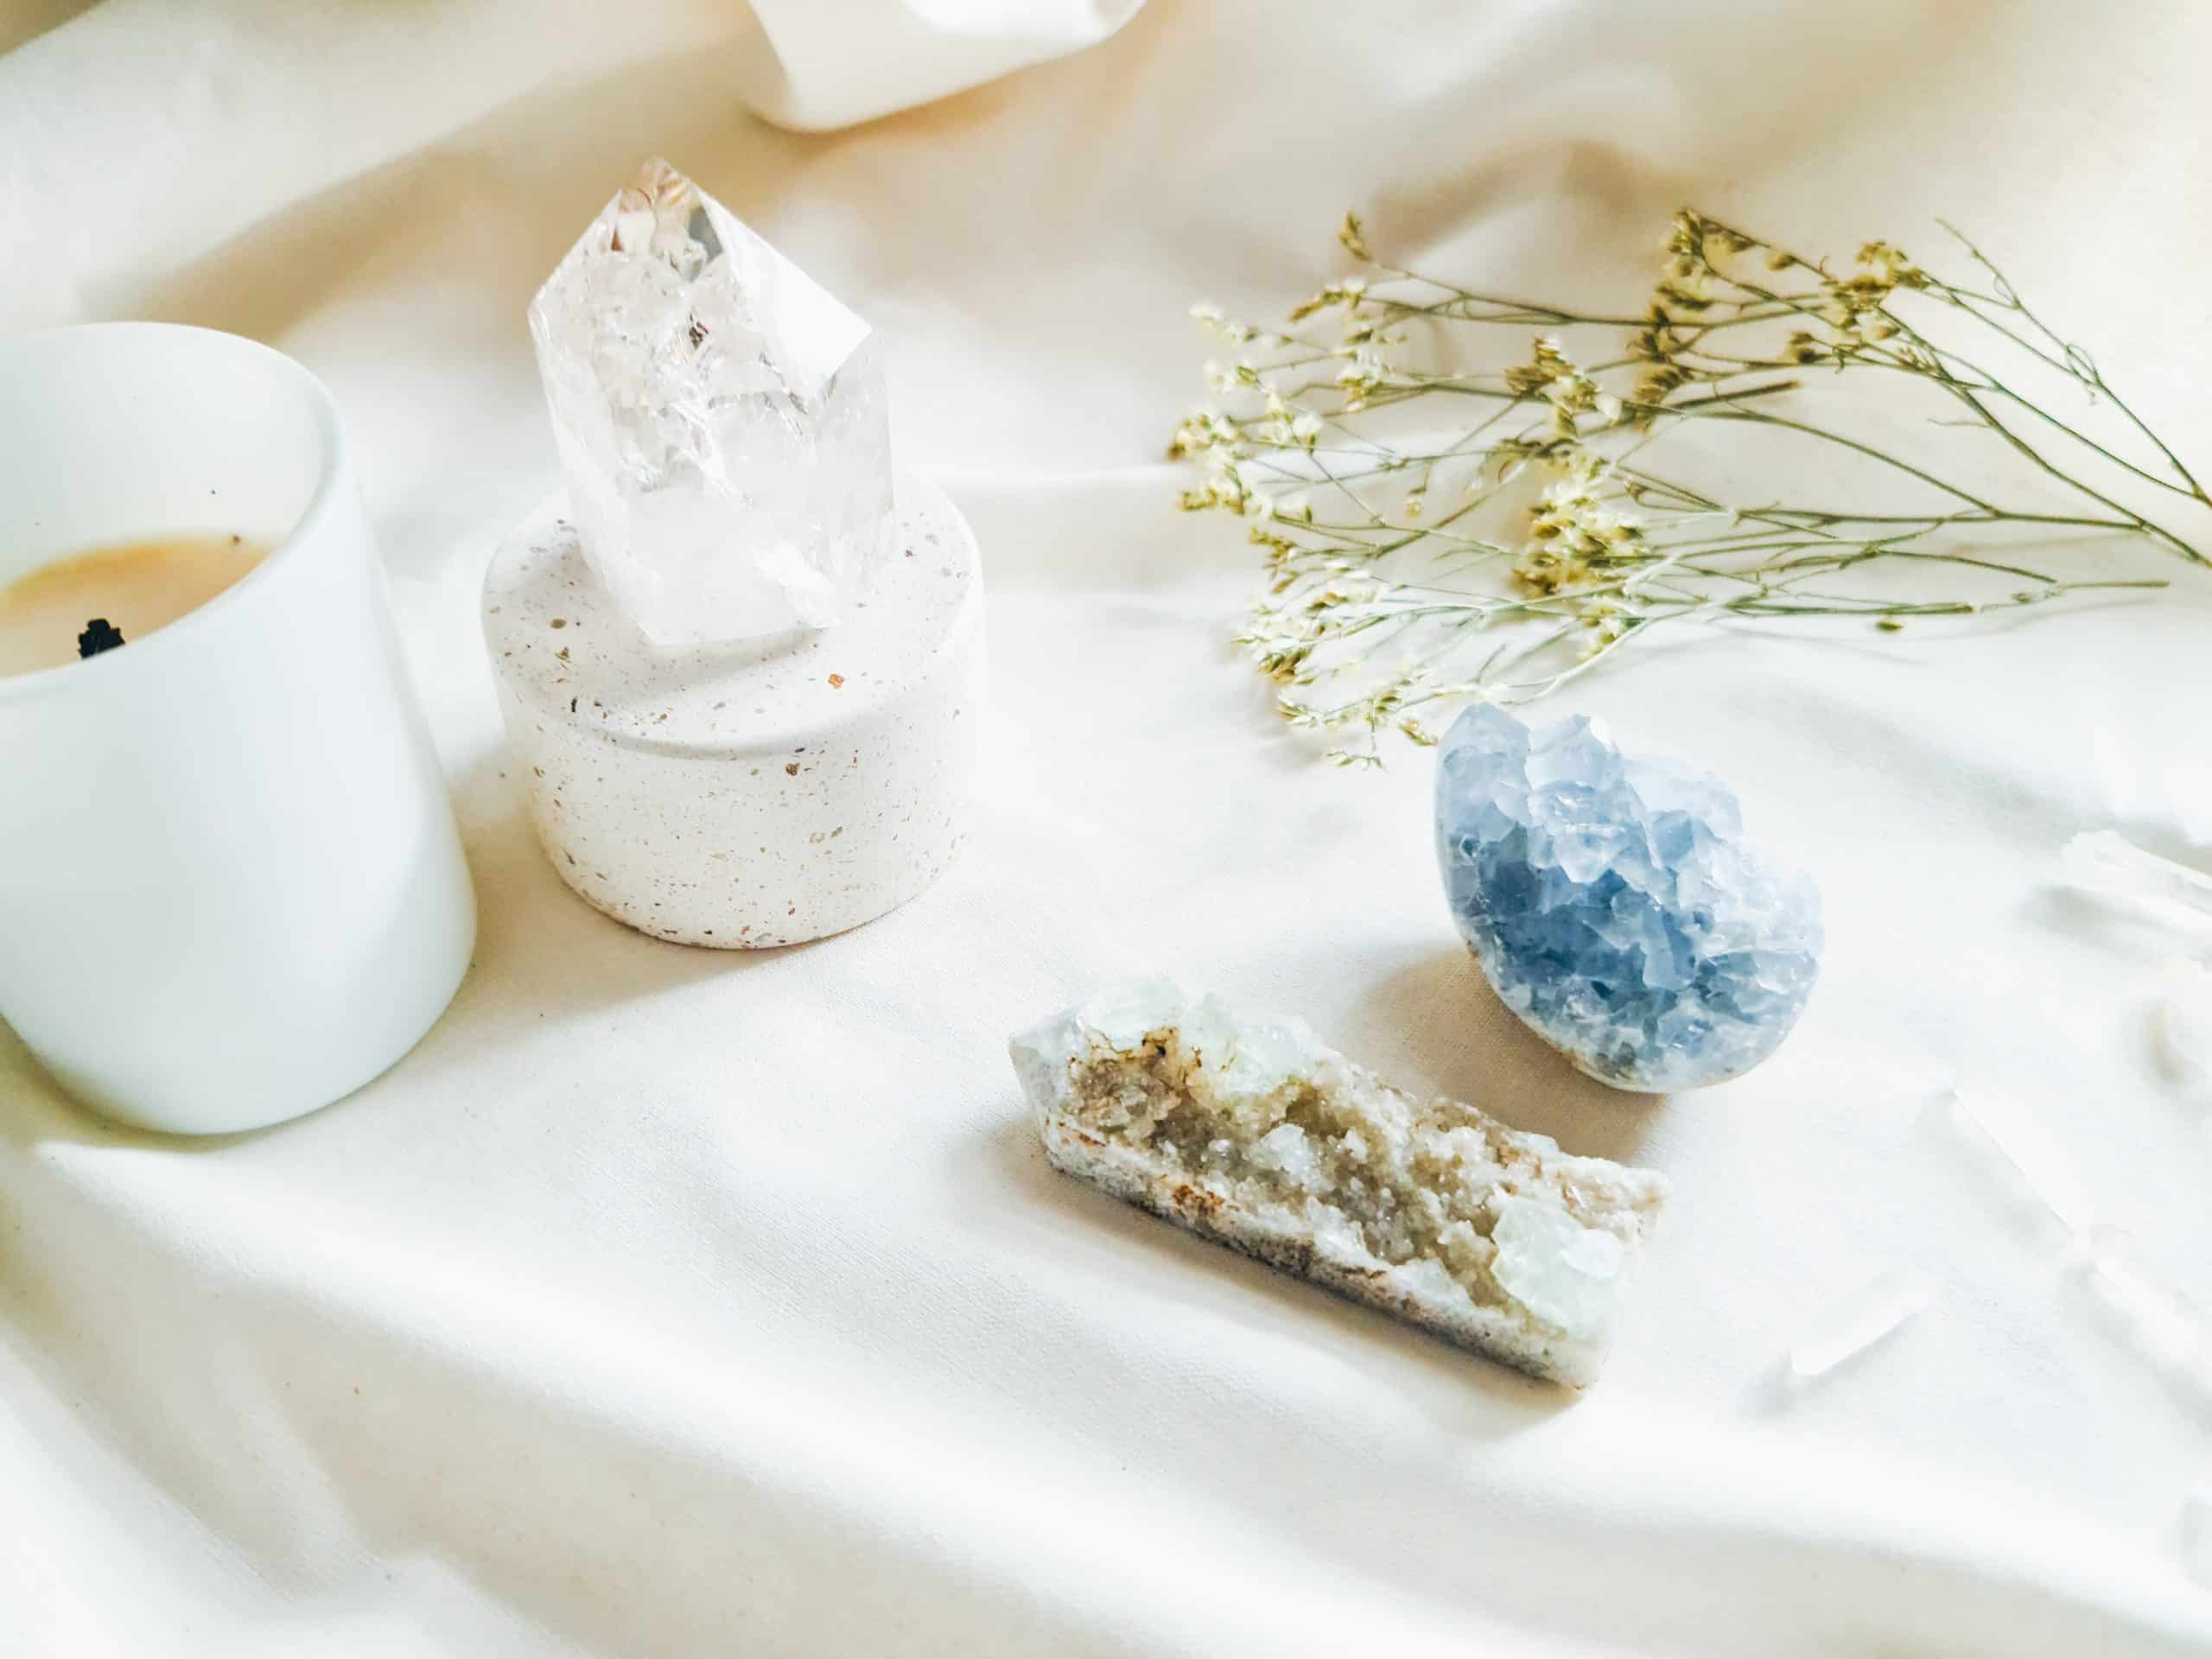 What Crystals Are Good for Manifesting? Get What You Want